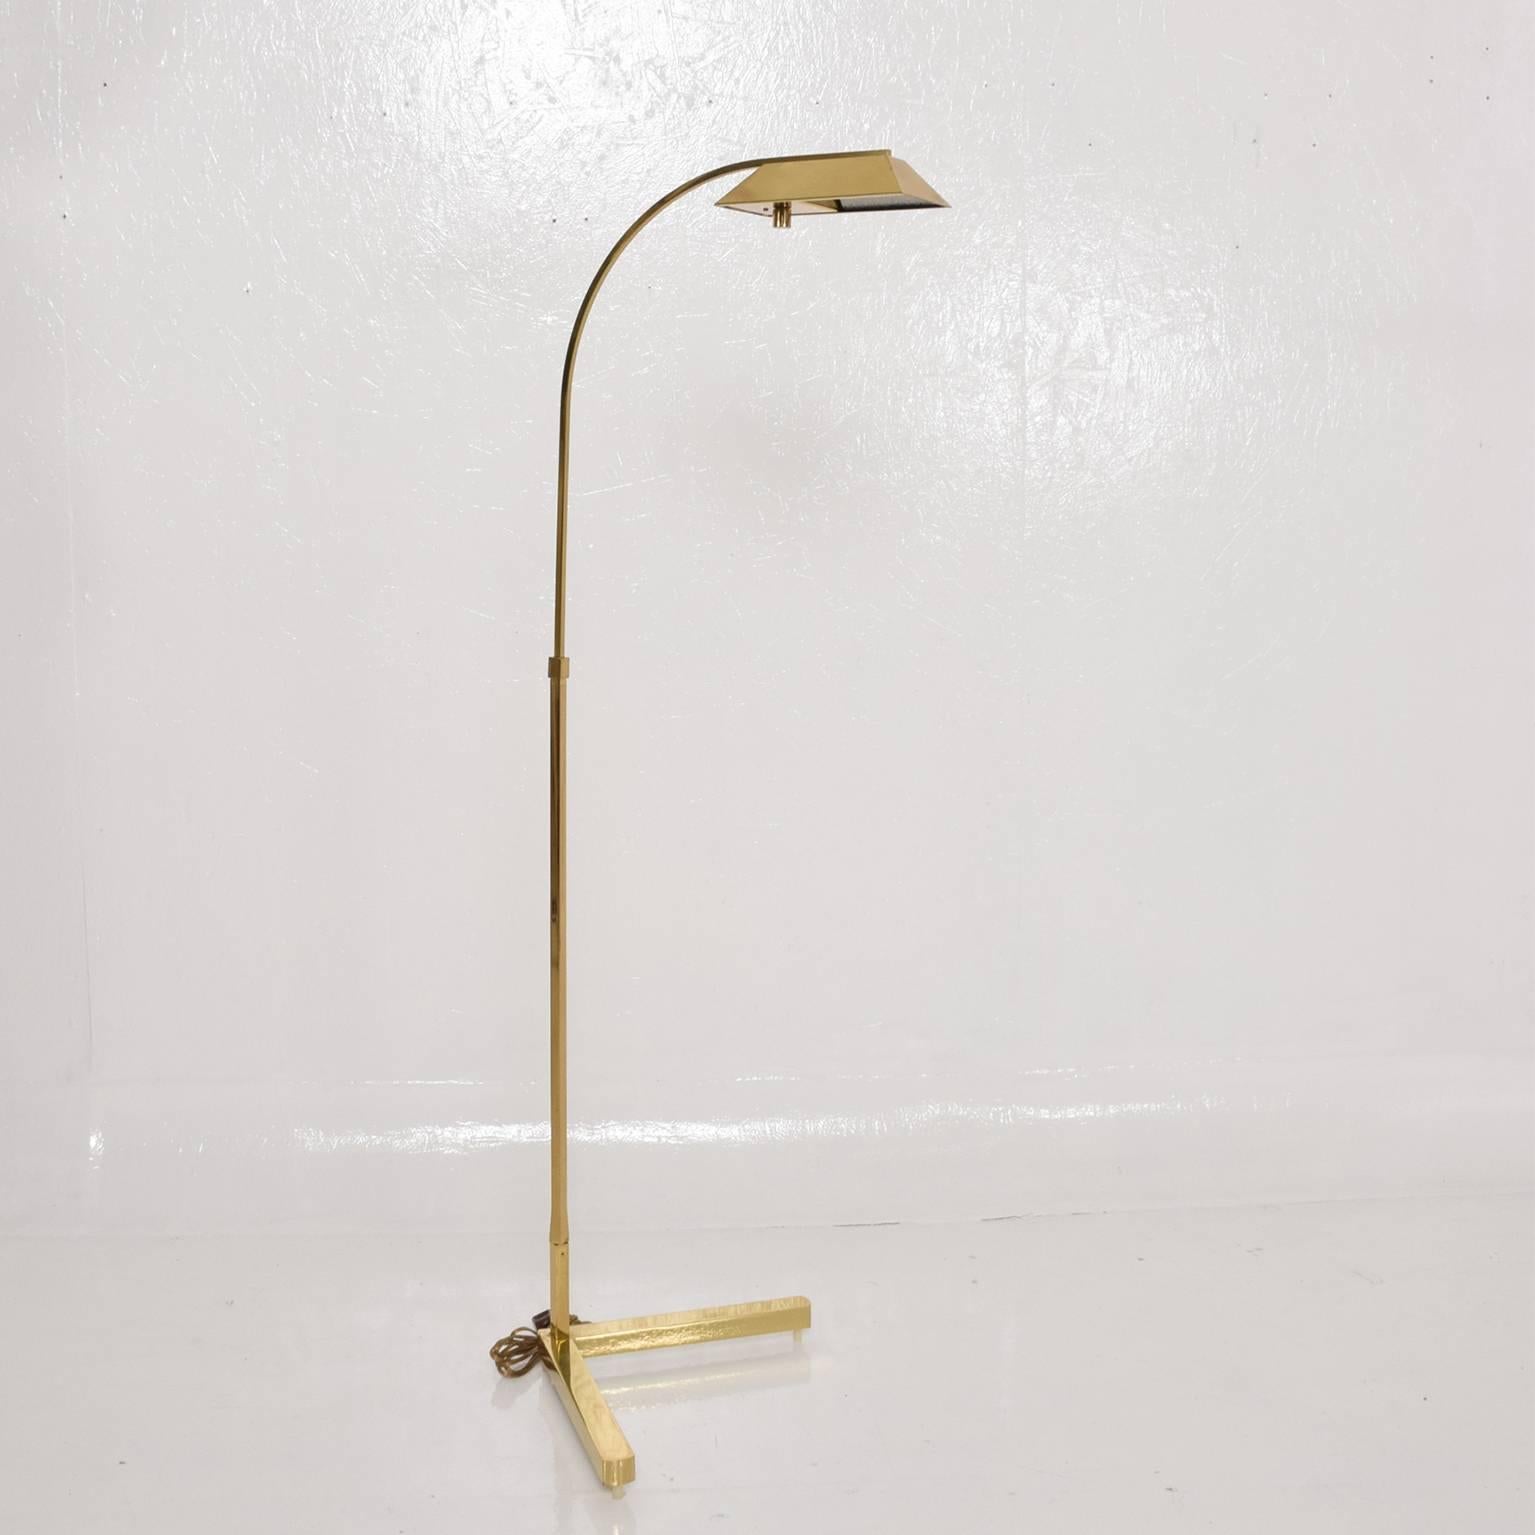 We are pleased to offer for your consideration a Mid-Century Modern brass floor lamp by Casella.

Lamp retains label from the maker underneath. 
Dimensions: 49" H x 17" D x 12" x 12" base.